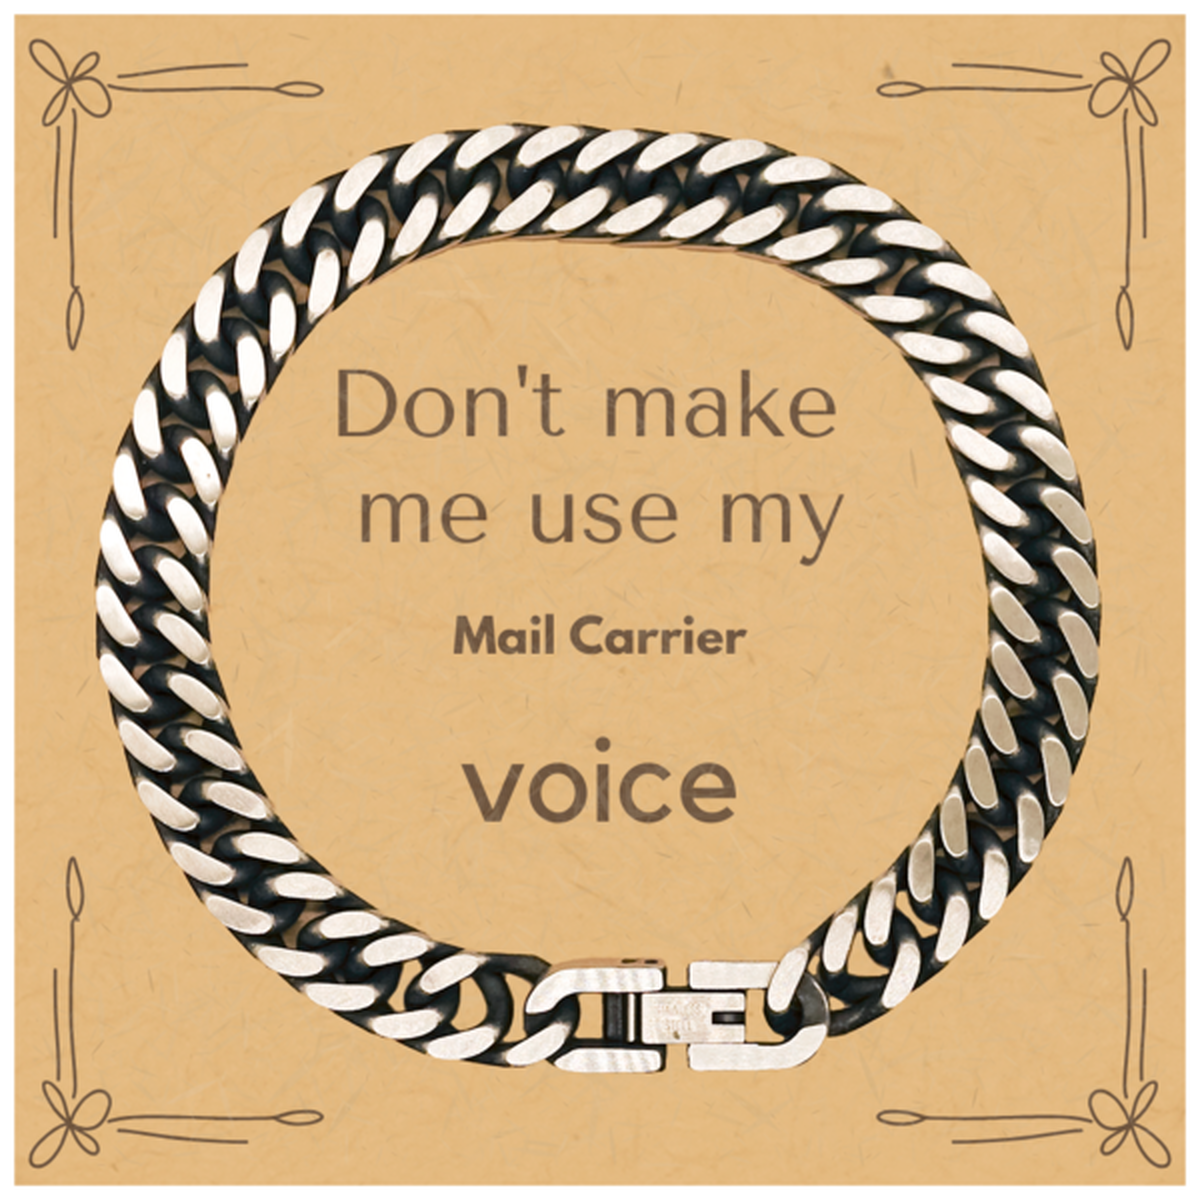 Don't make me use my Mail Carrier voice, Sarcasm Mail Carrier Card Gifts, Christmas Mail Carrier Cuban Link Chain Bracelet Birthday Unique Gifts For Mail Carrier Coworkers, Men, Women, Colleague, Friends